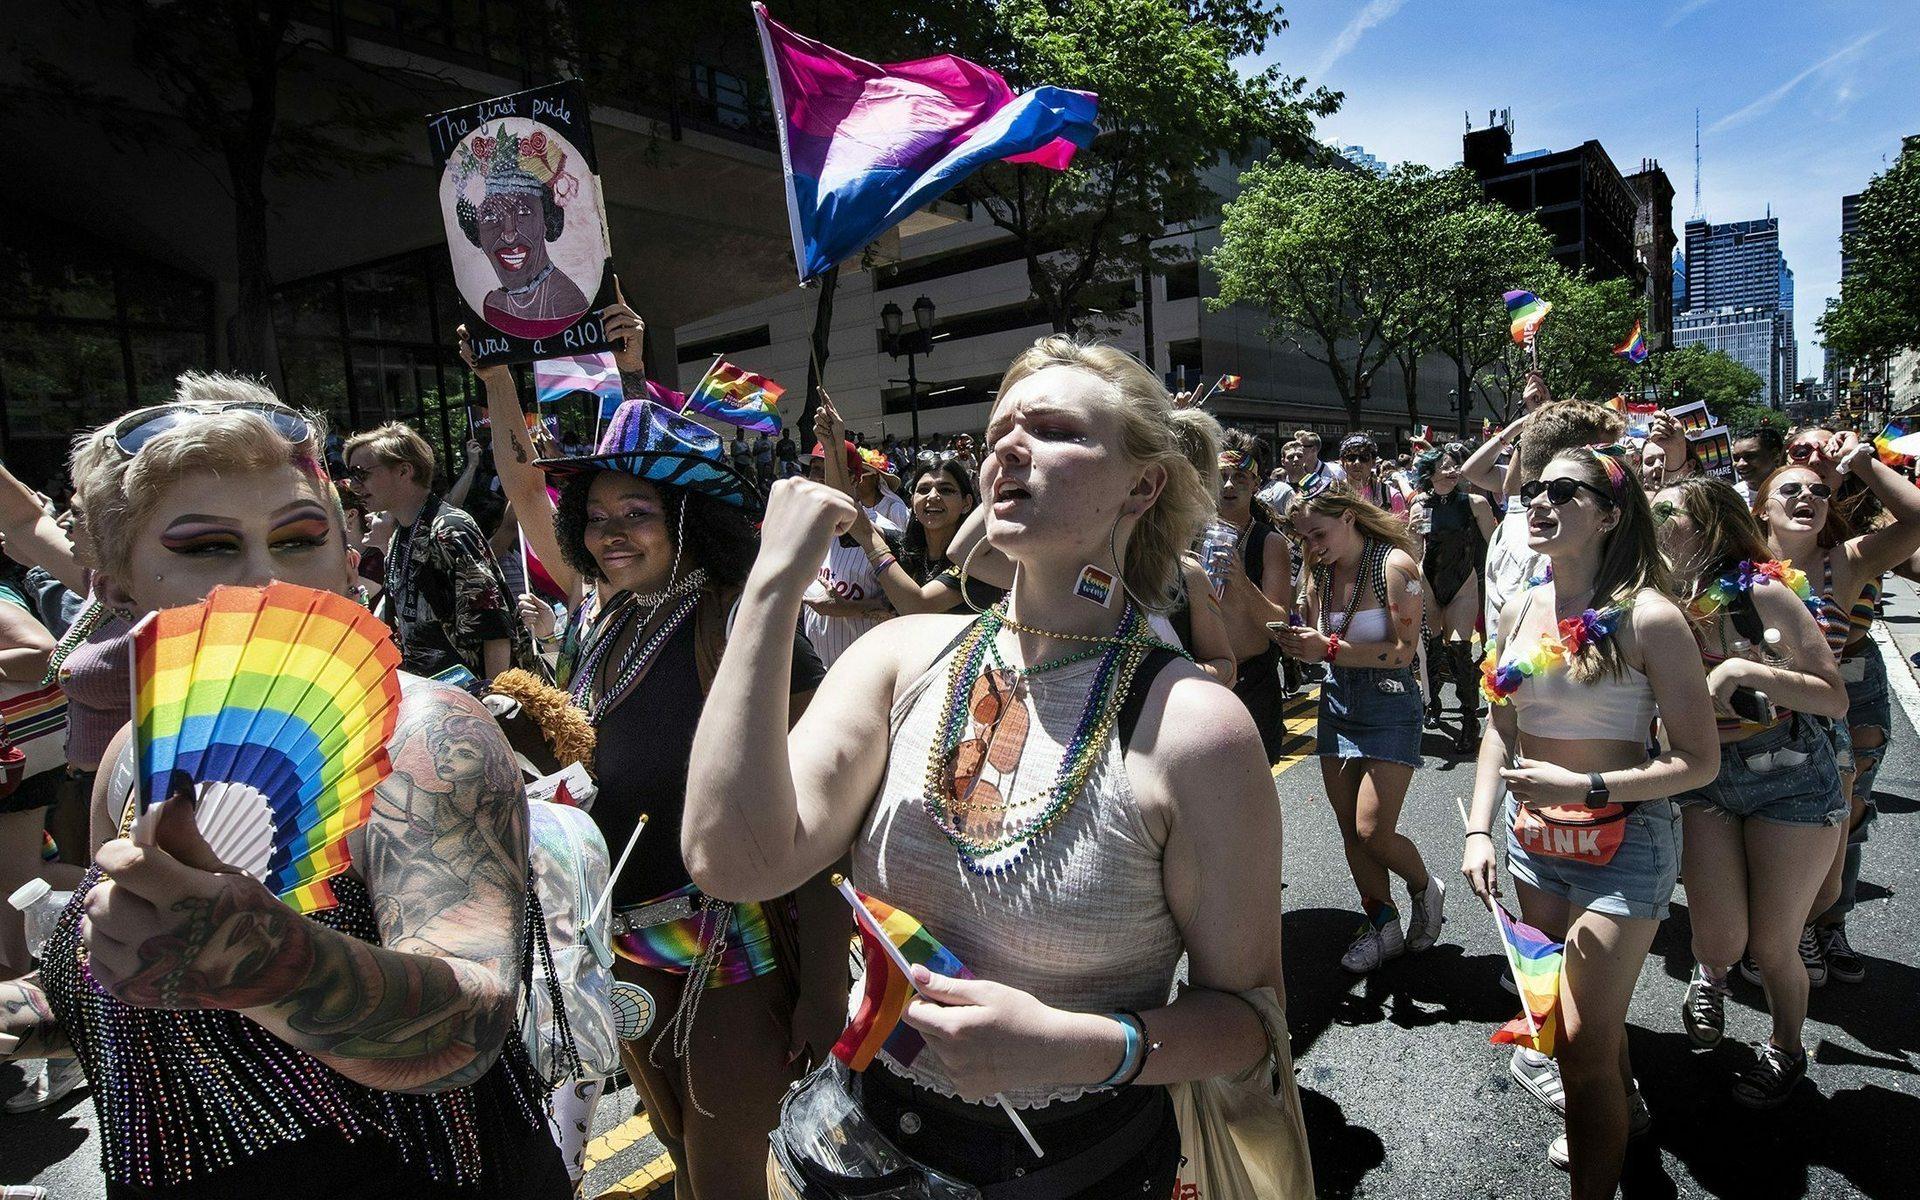 Parade-goers dance in the street during Philly&apos;s LGBT Pride Parade in Philadelphia on Sunday, June 9, 2019. The parade theme was Stonewall 50, in honor of the 50th anniversary of the Stonewall riots and the beginning of the LGBT rights movement. (Jose F. Moreno/The Philadelphia Inquirer via AP)